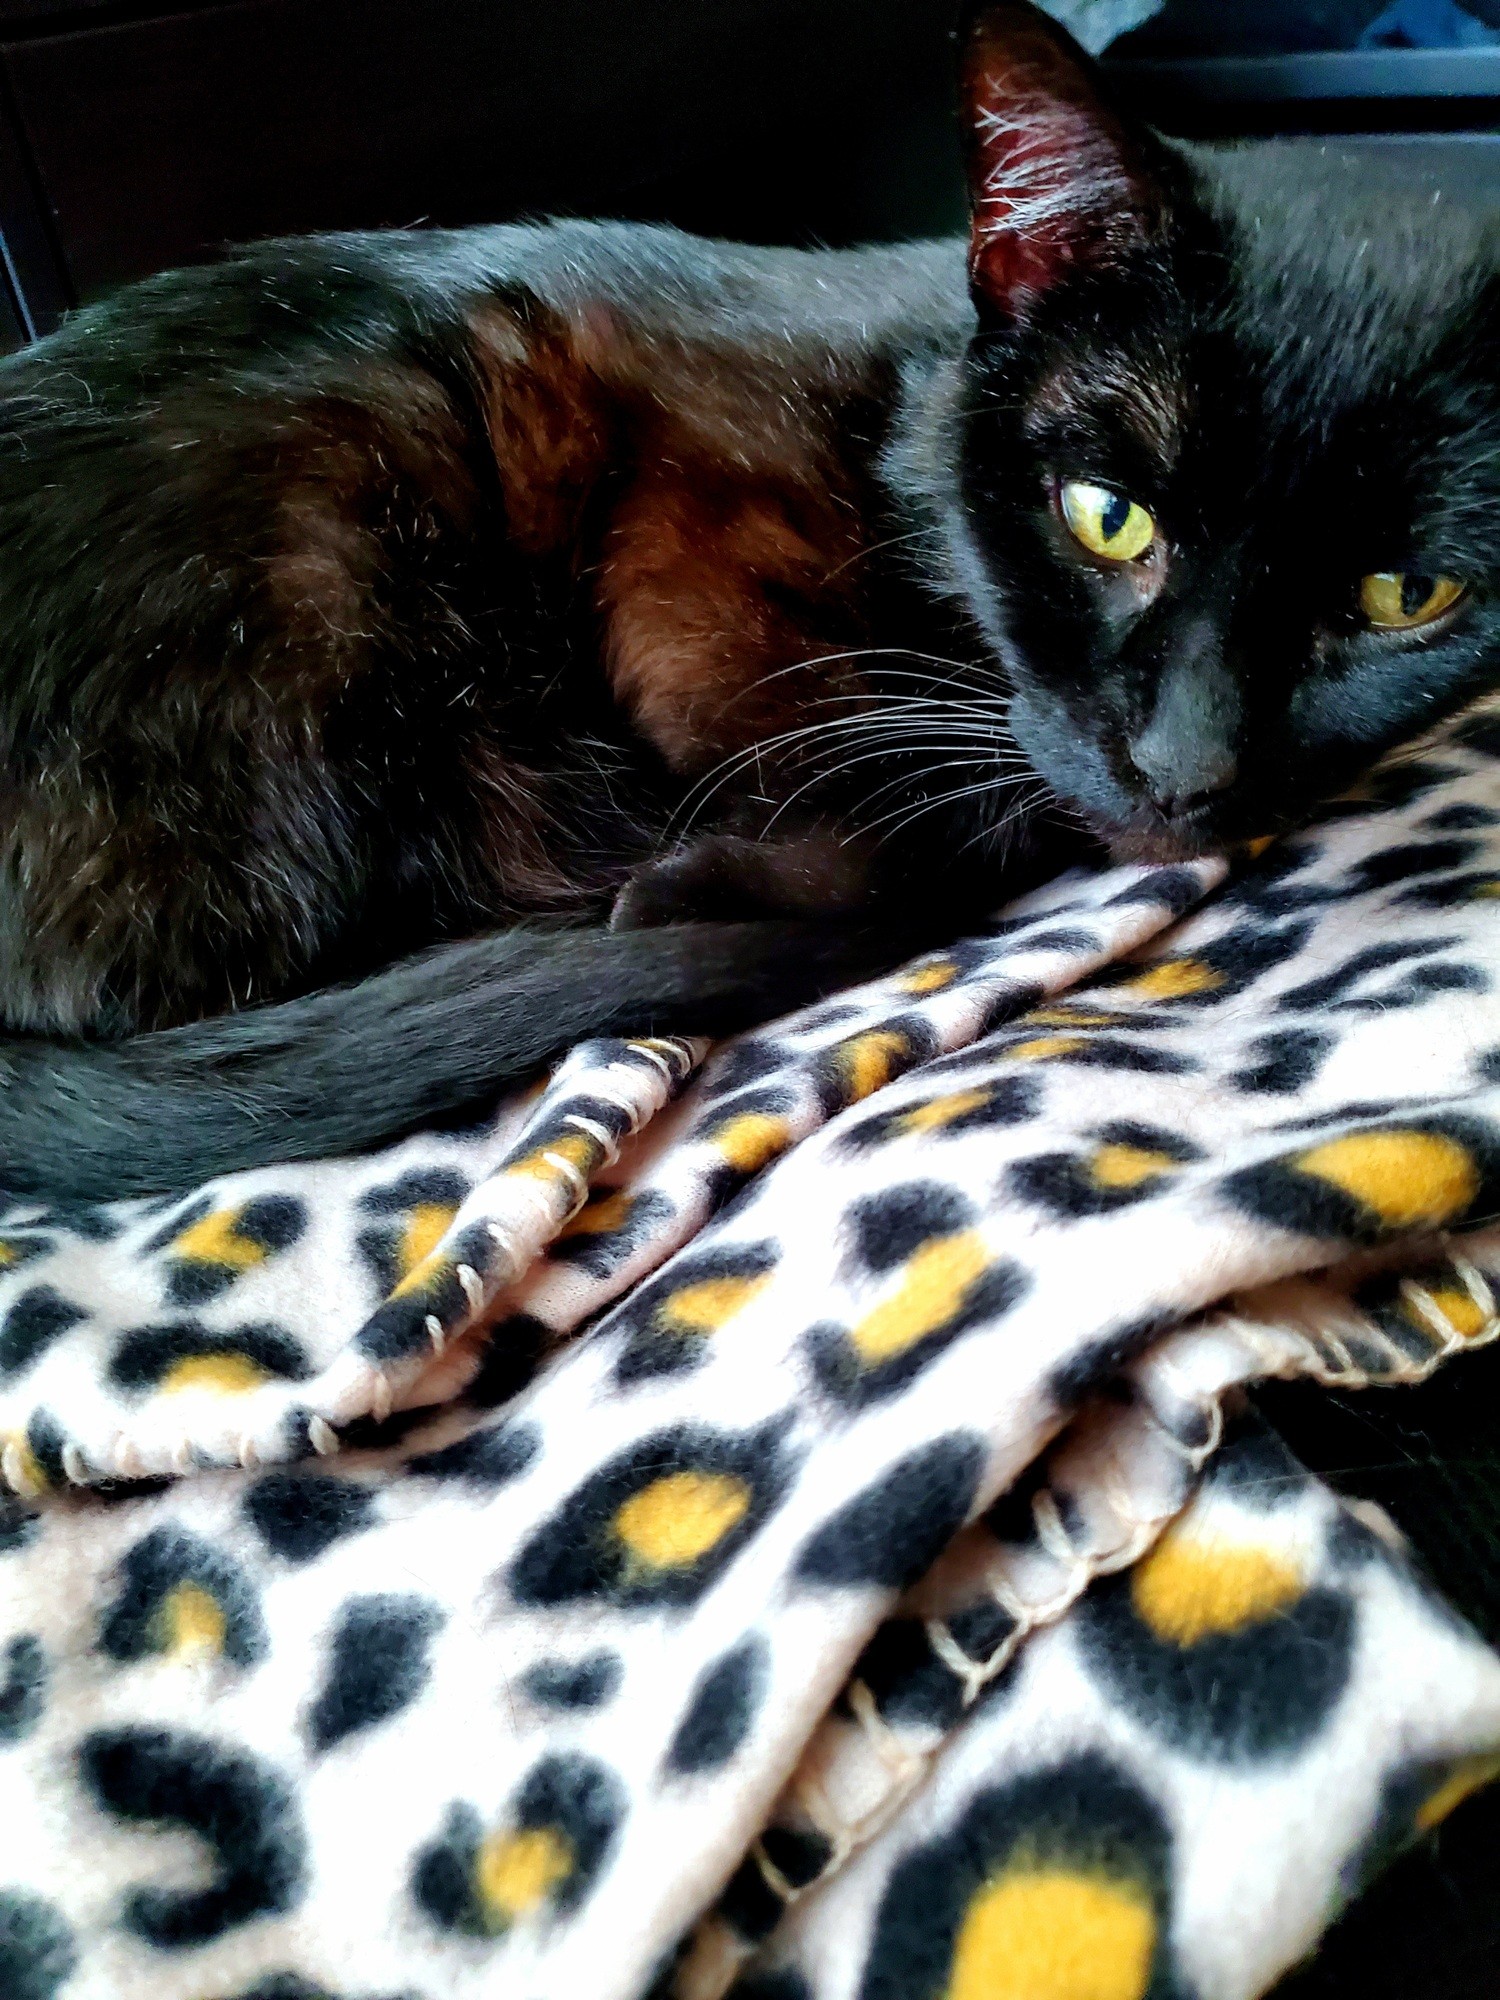 A black cat with green eyes lays on a leopard print blanket